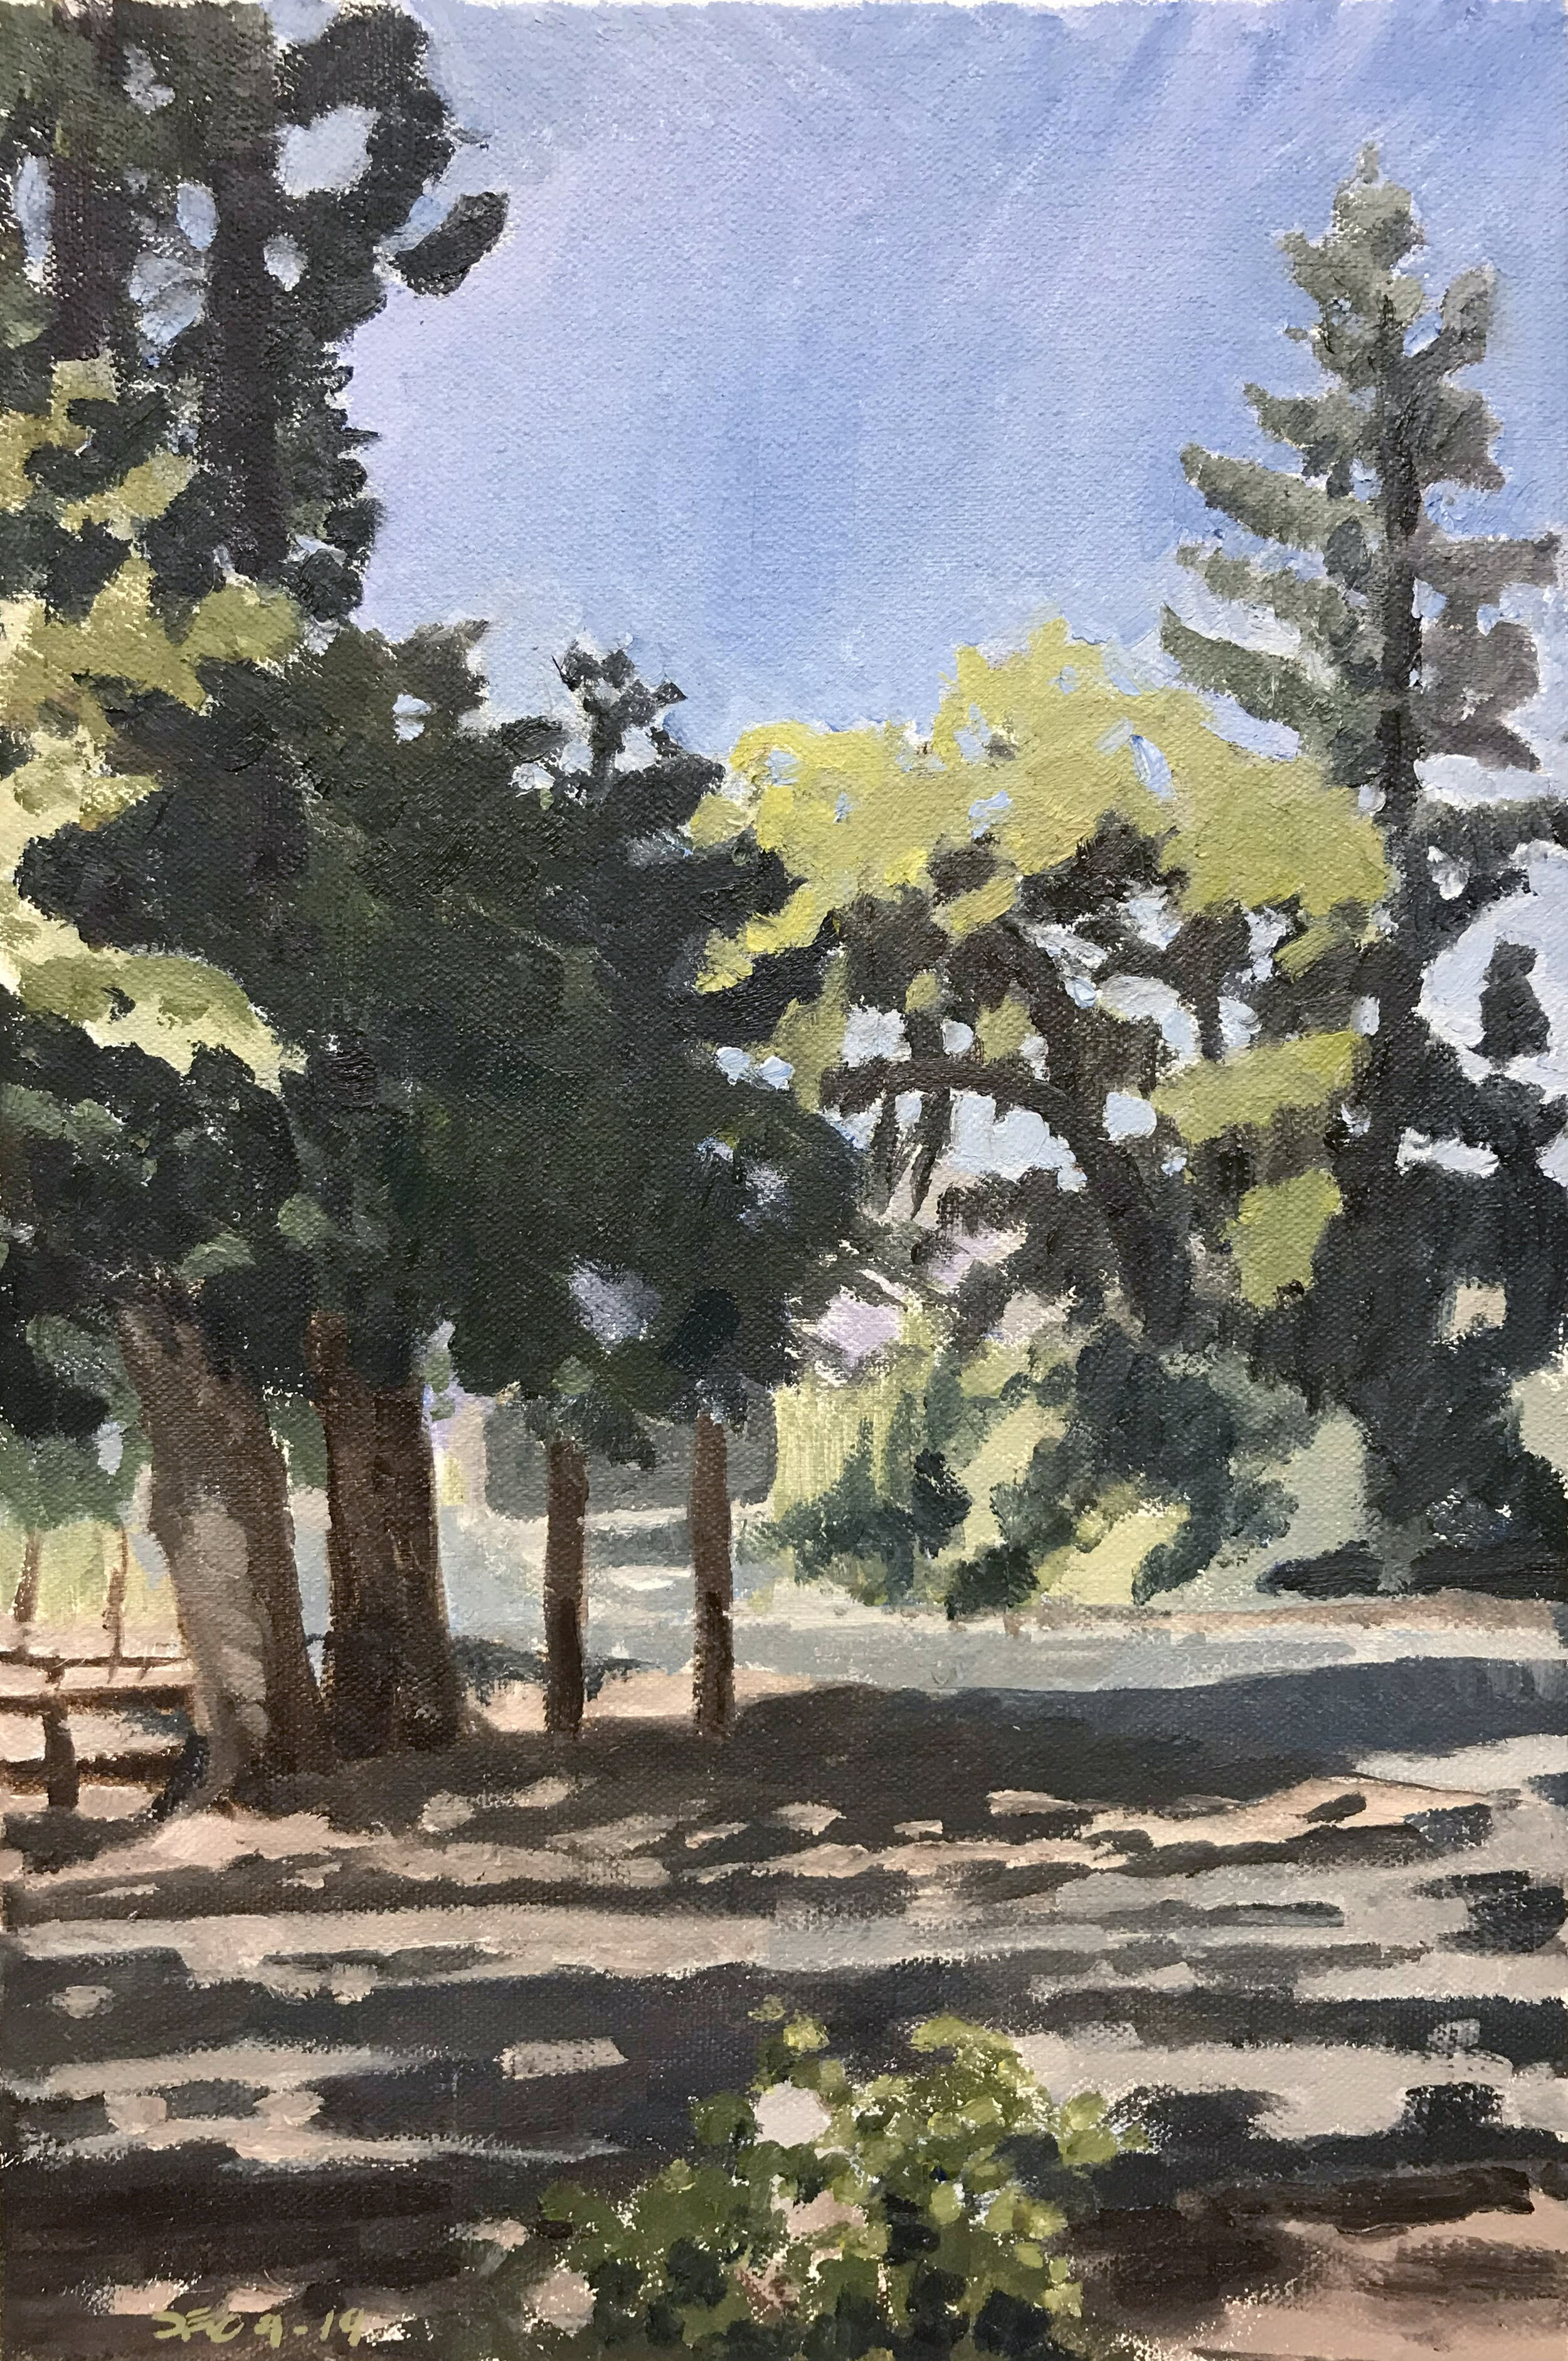  Illinois Valley Visitor’s Center (2019)  11” x 8” — oil on canvas  Available for purchase. 